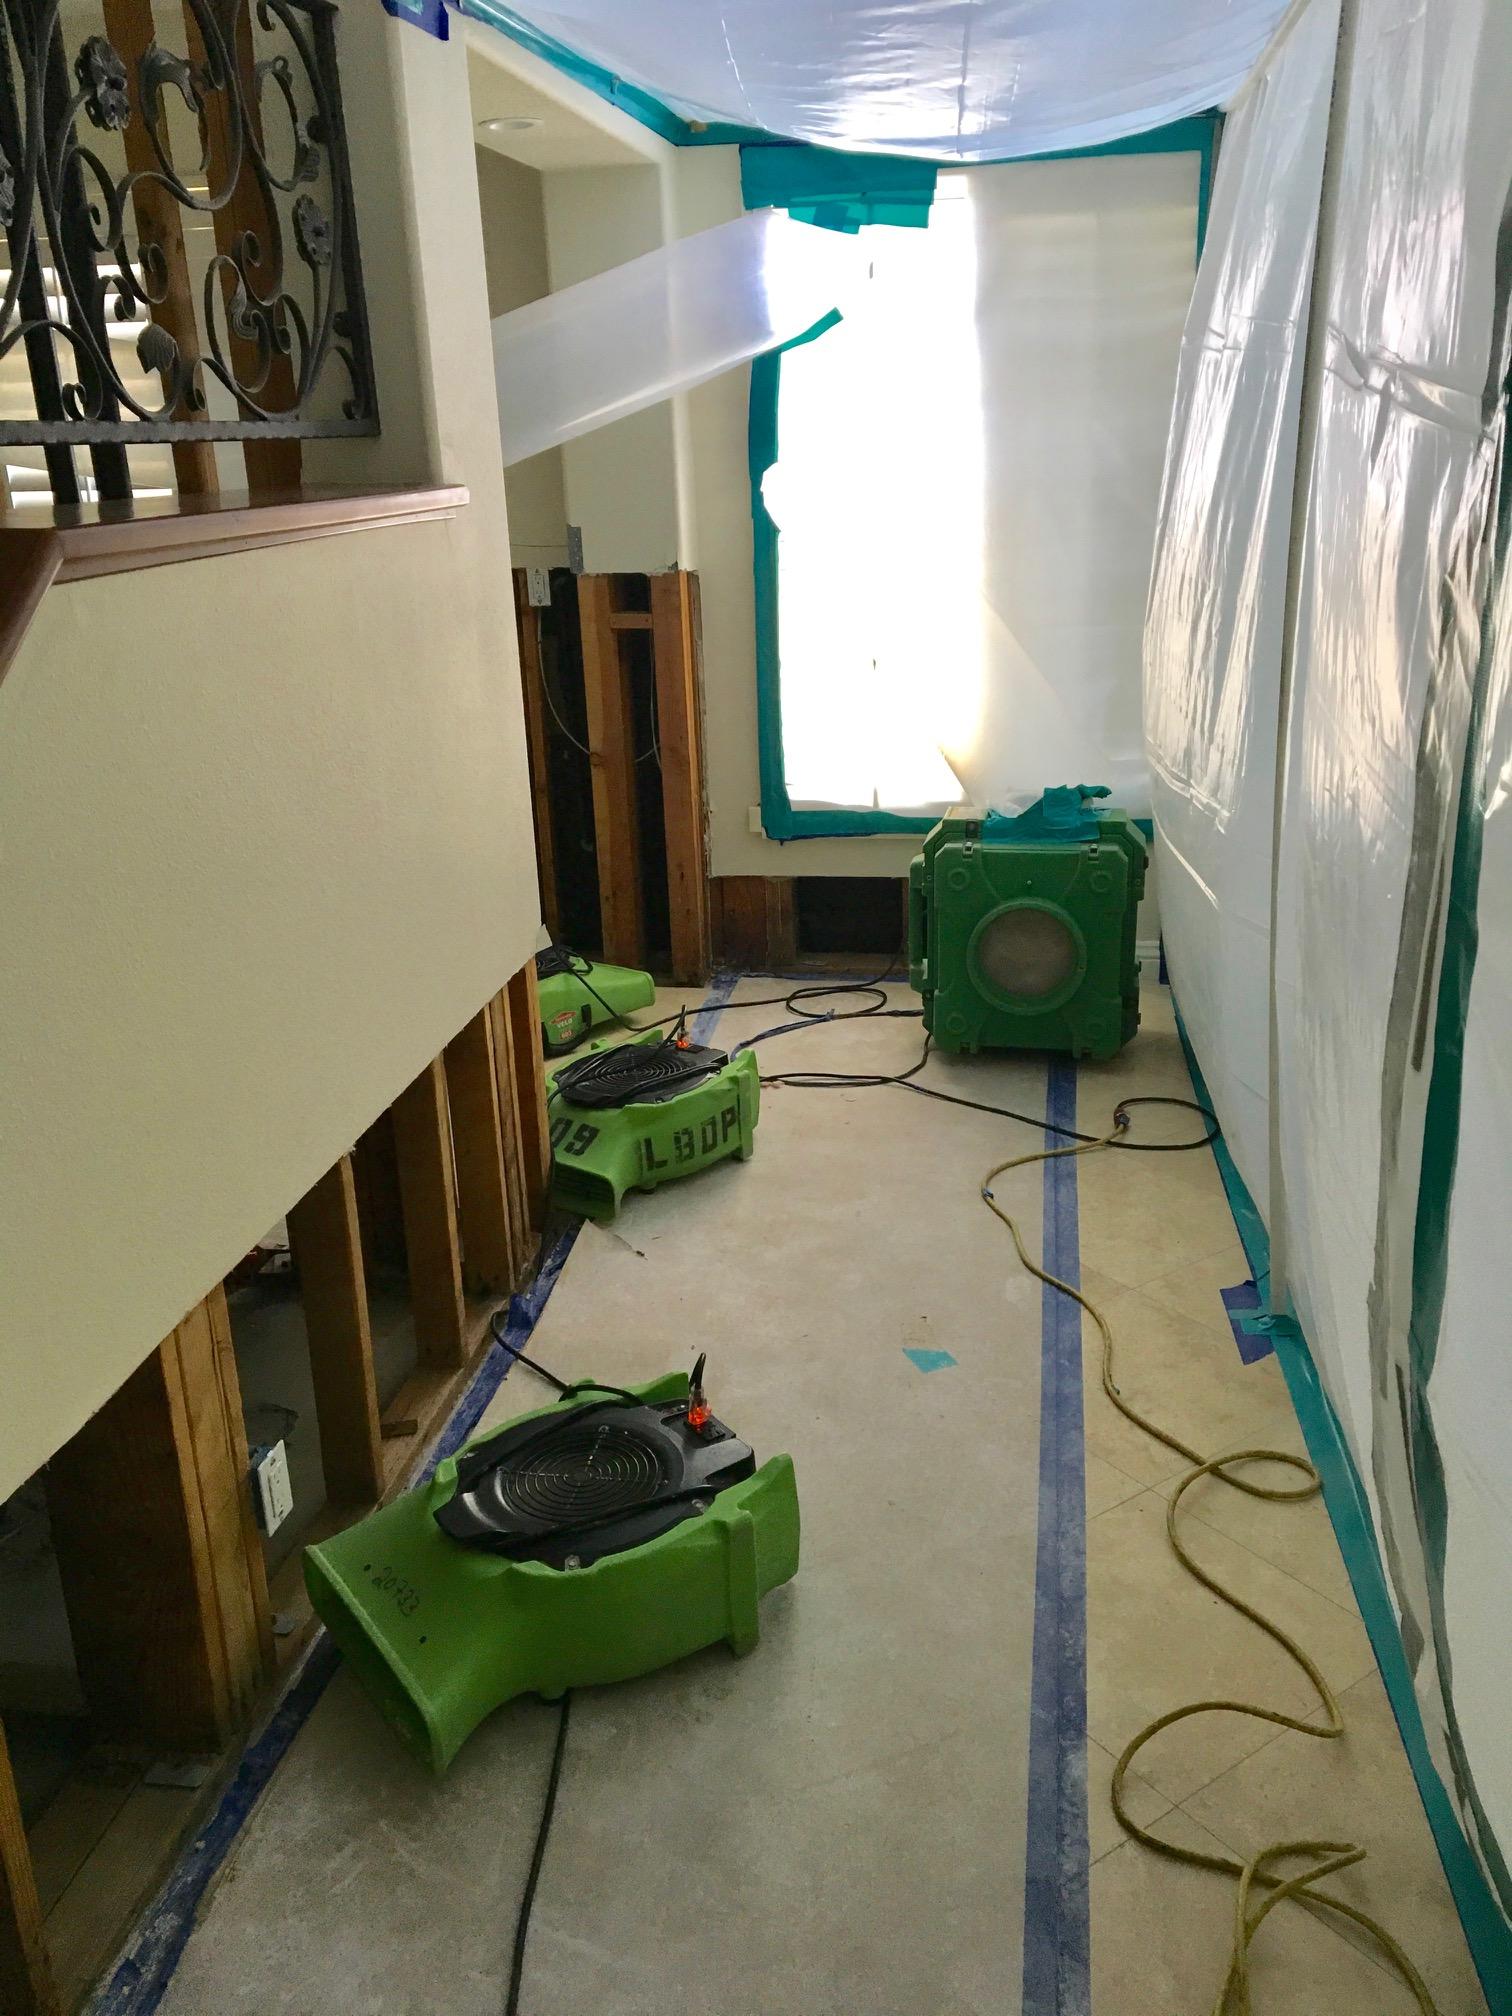 The SERVPRO equipment is up and running!